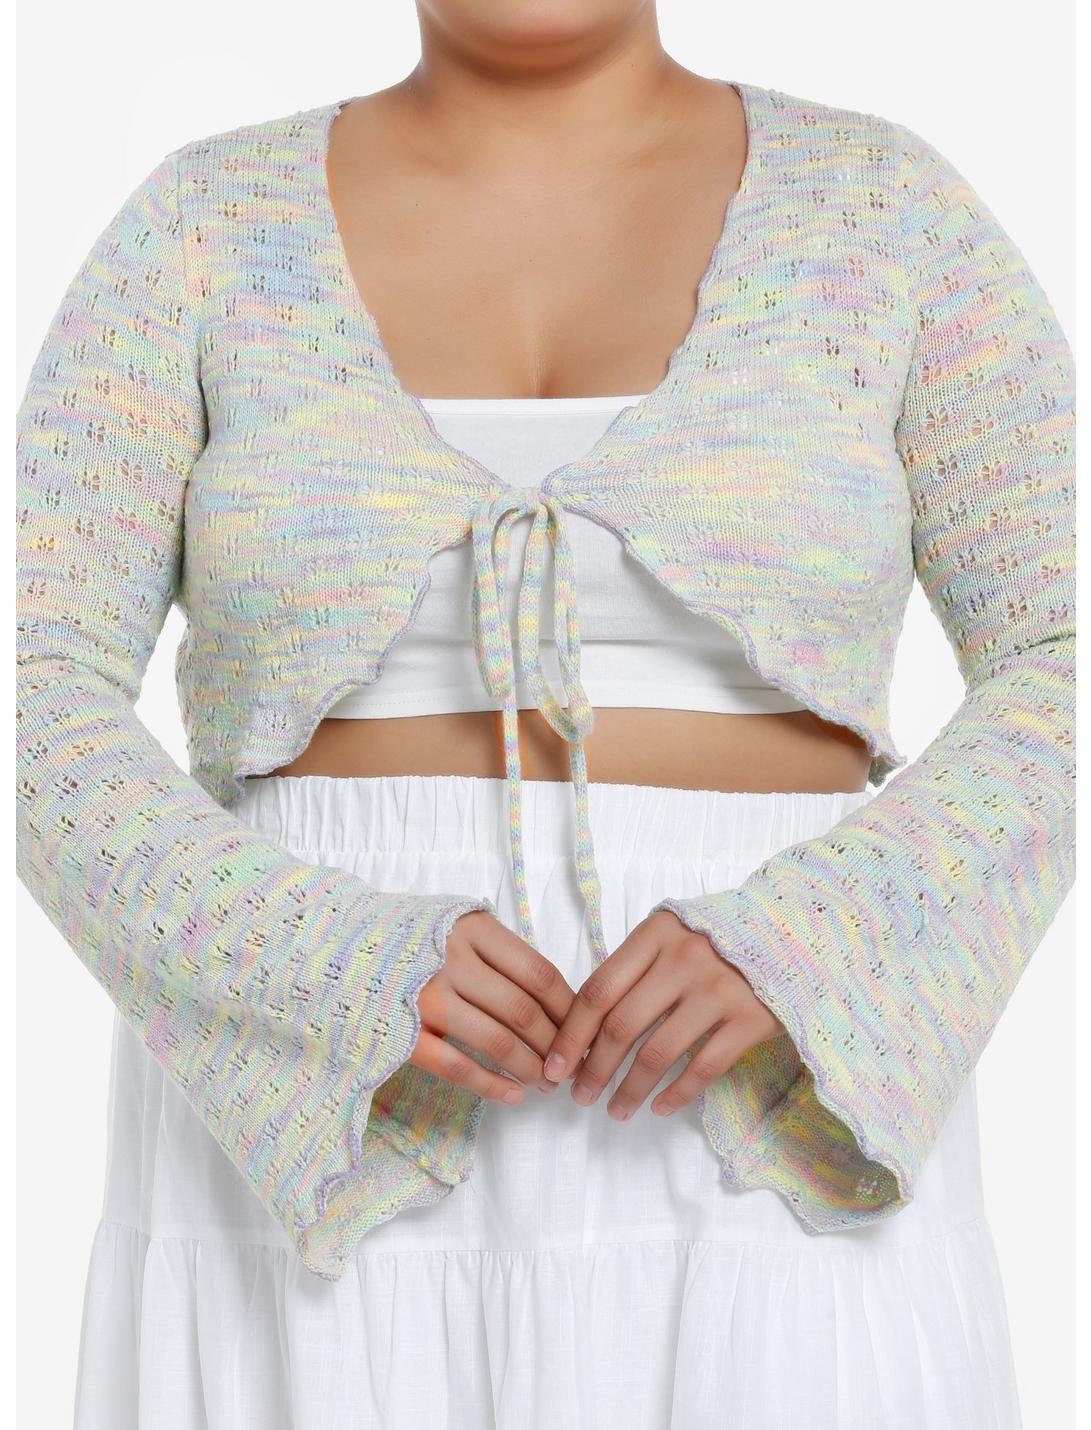 Thorn & Fable Pastel Rainbow Girls Bell Sleeve Knit Shrug Plus Size, PINK, hi-res